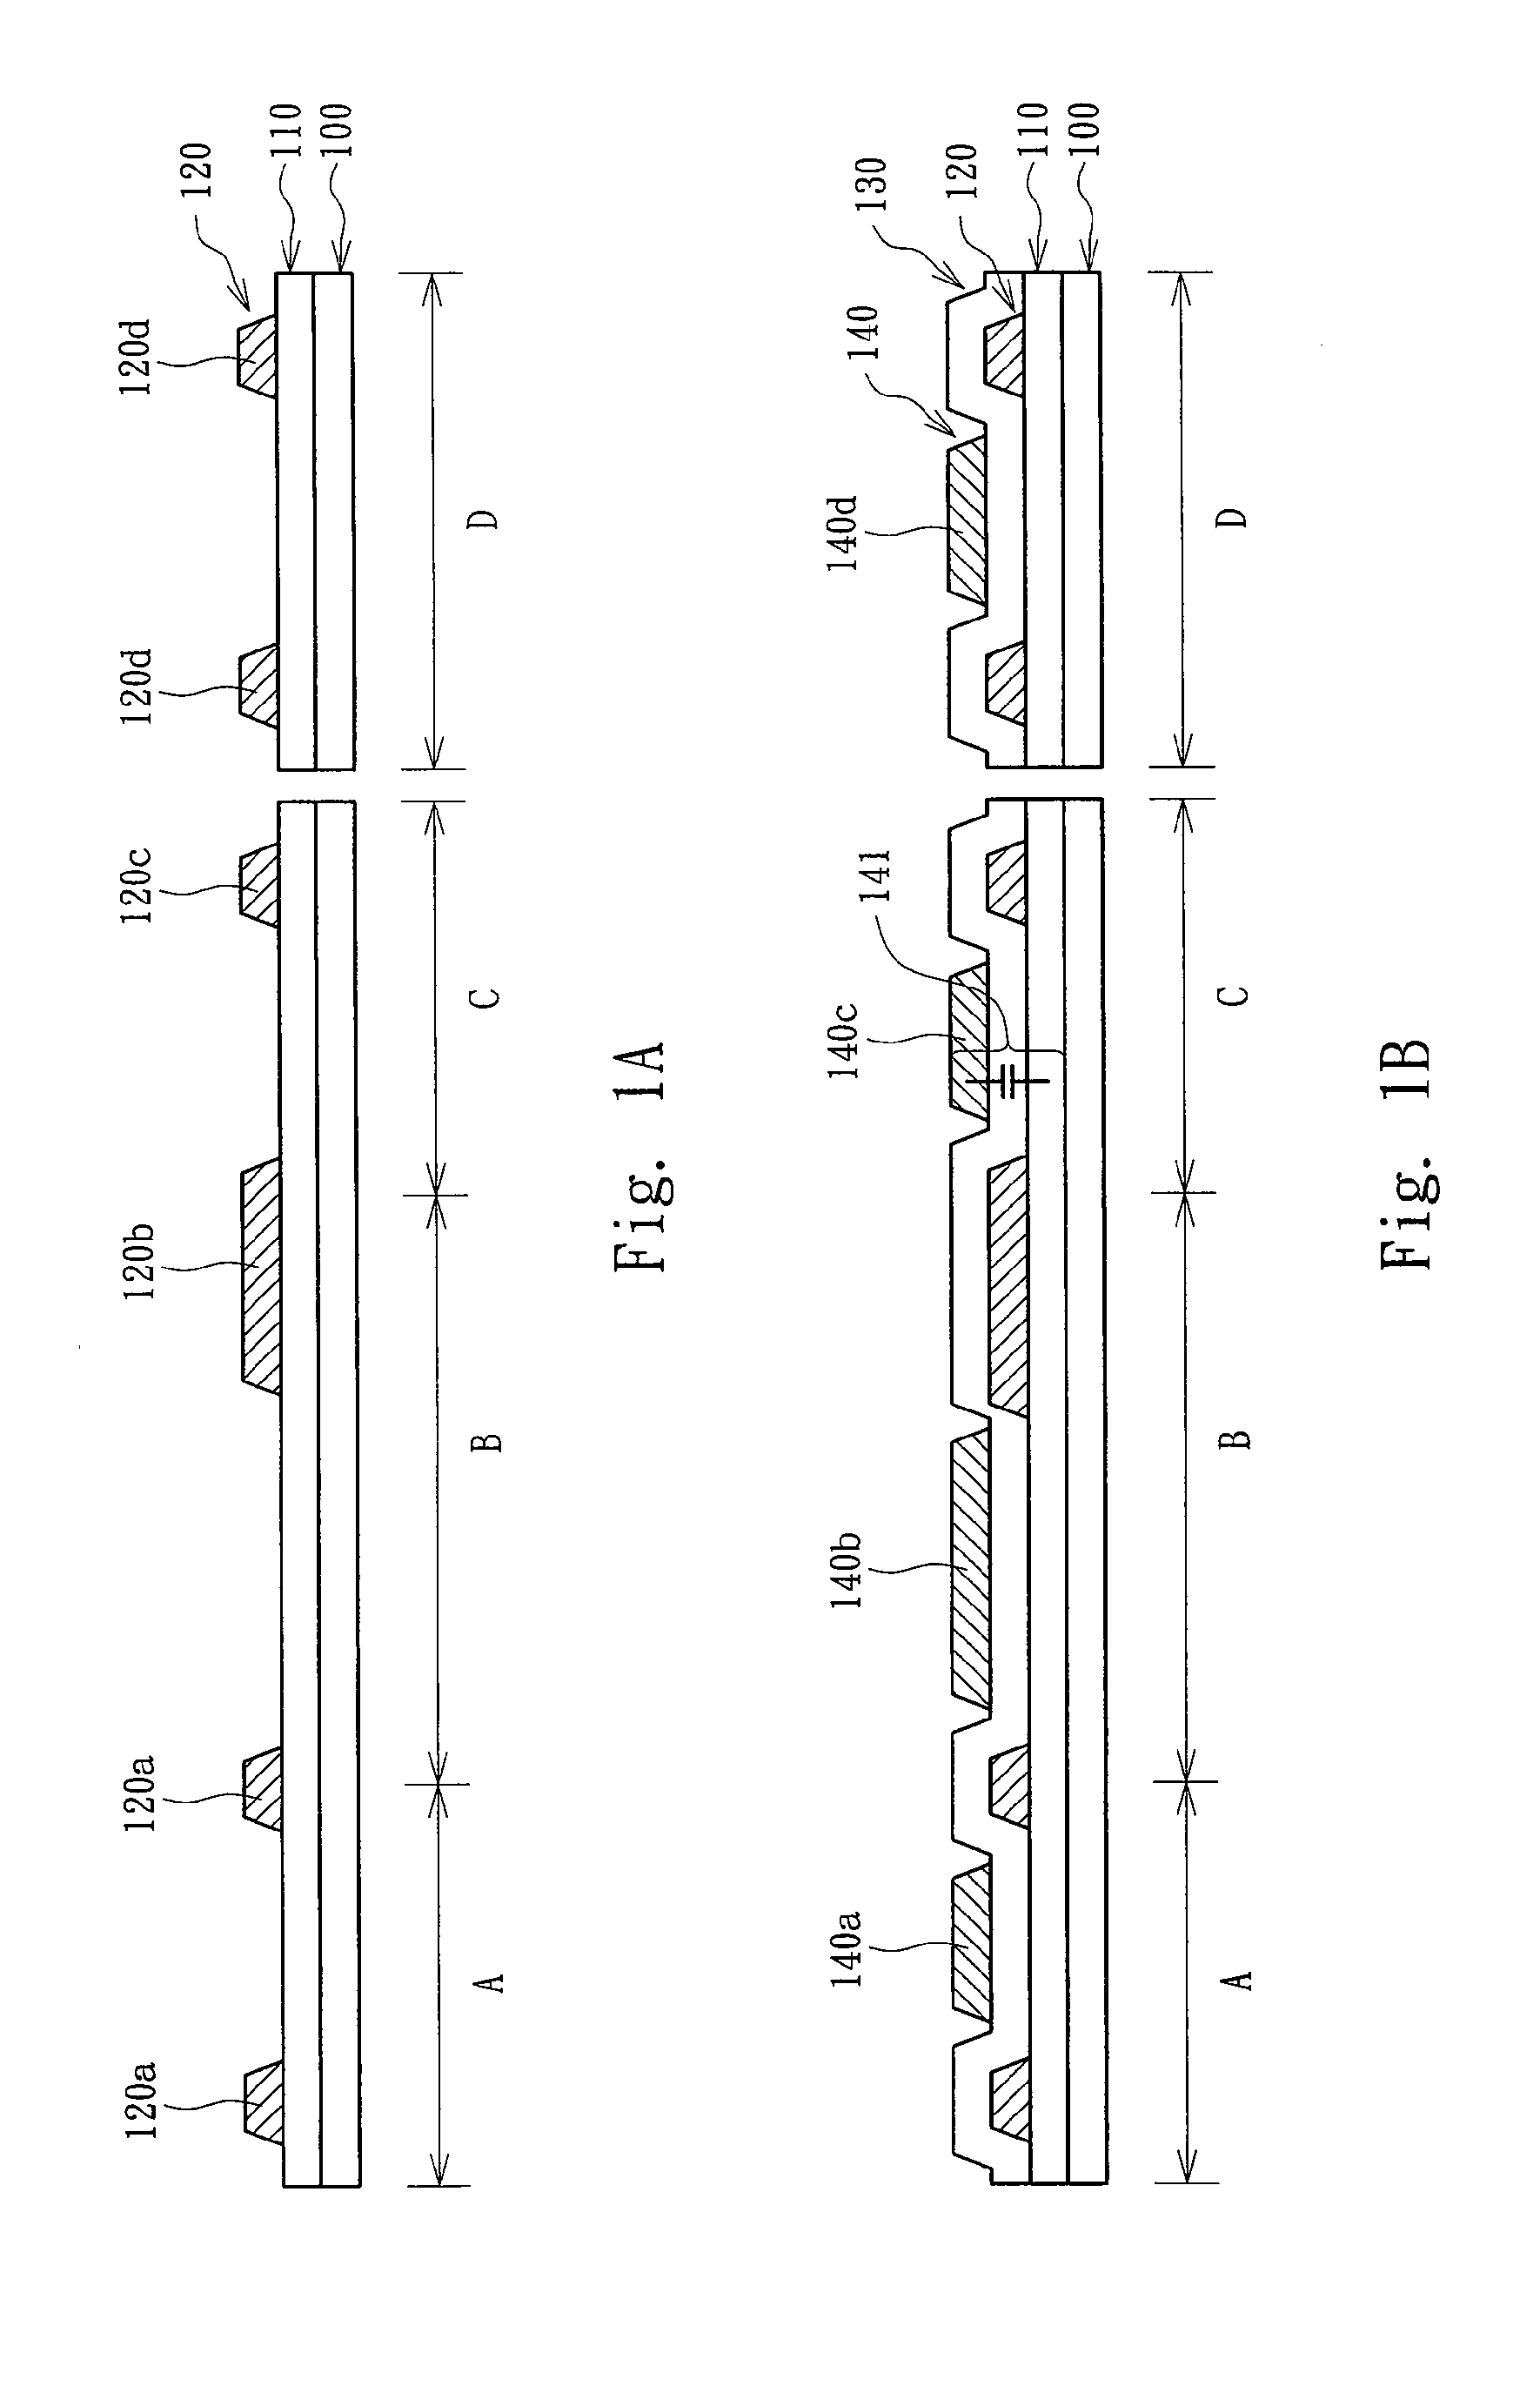 Method of Manufacturing an Array Substrate of a Transflective Liquid Crystal Display